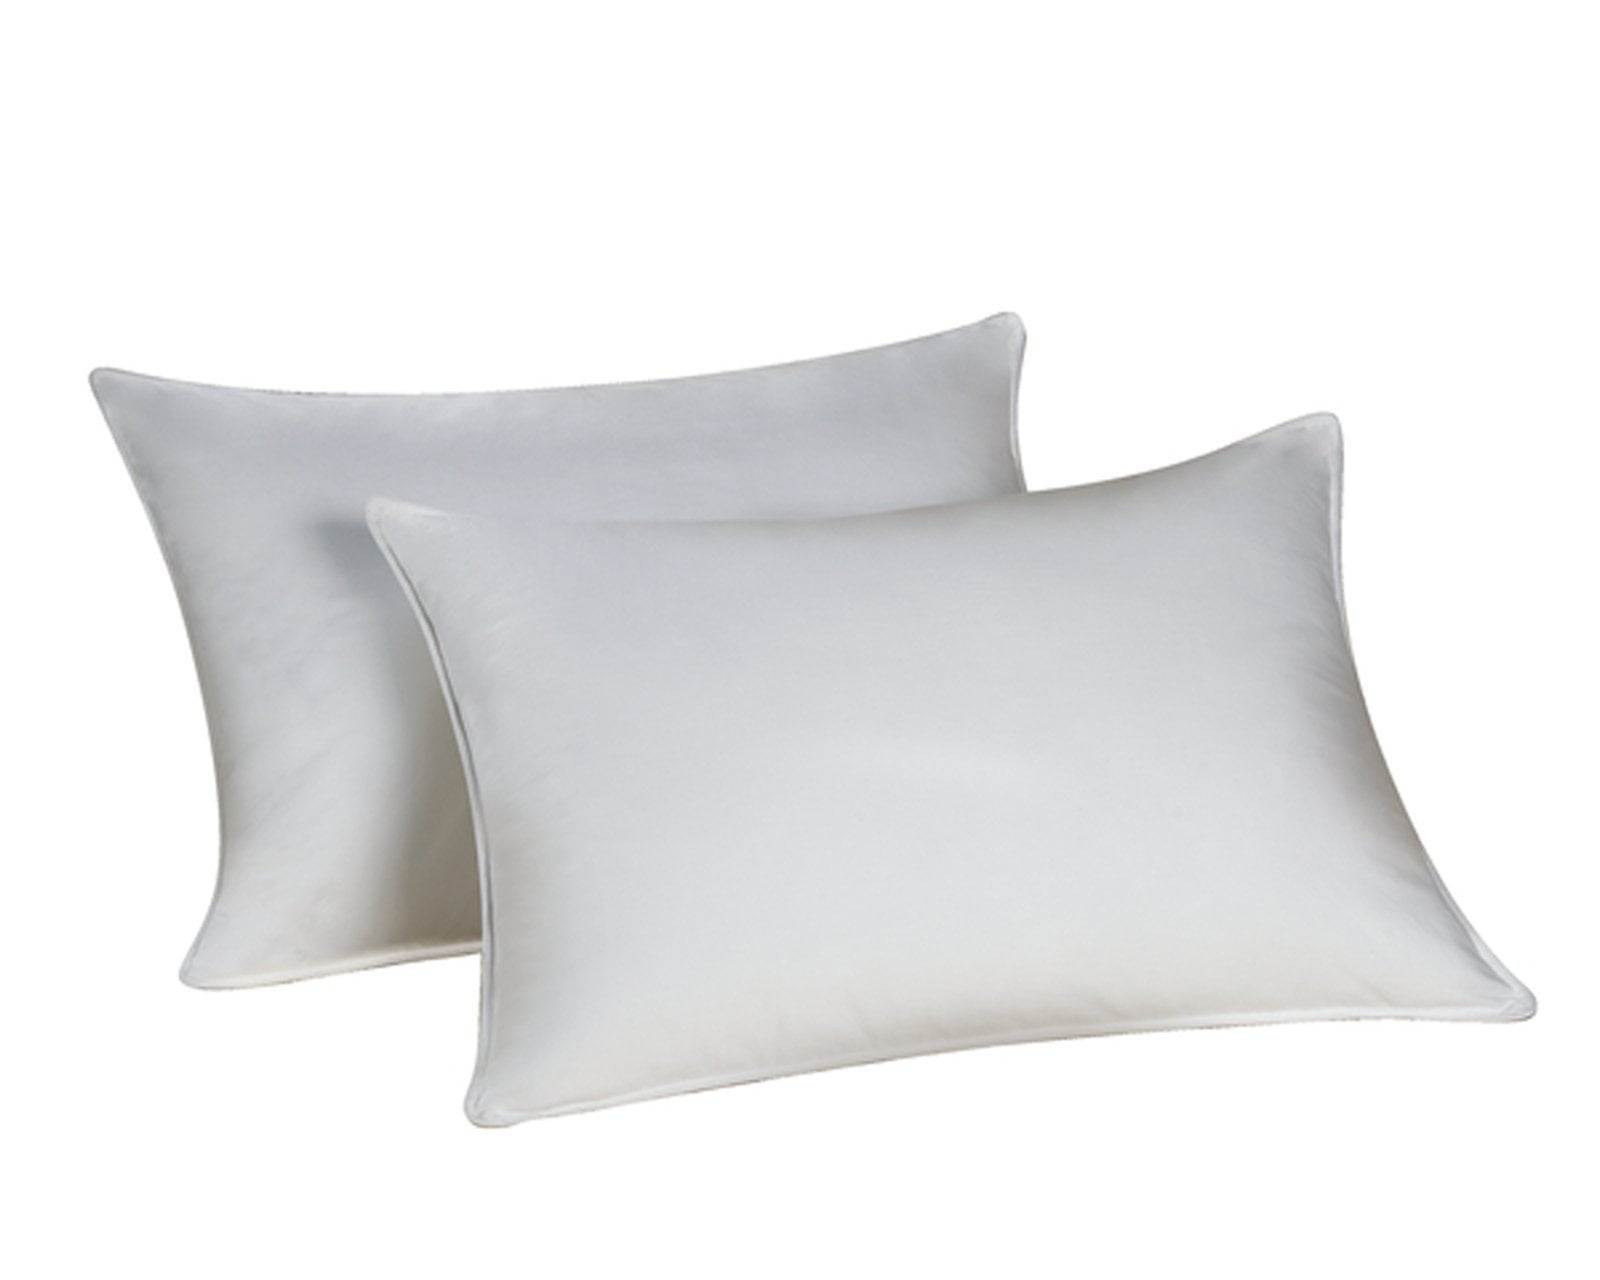 Classic Down Dreams Pillow found in Hilton Hotels comfy FREE SHIPPING